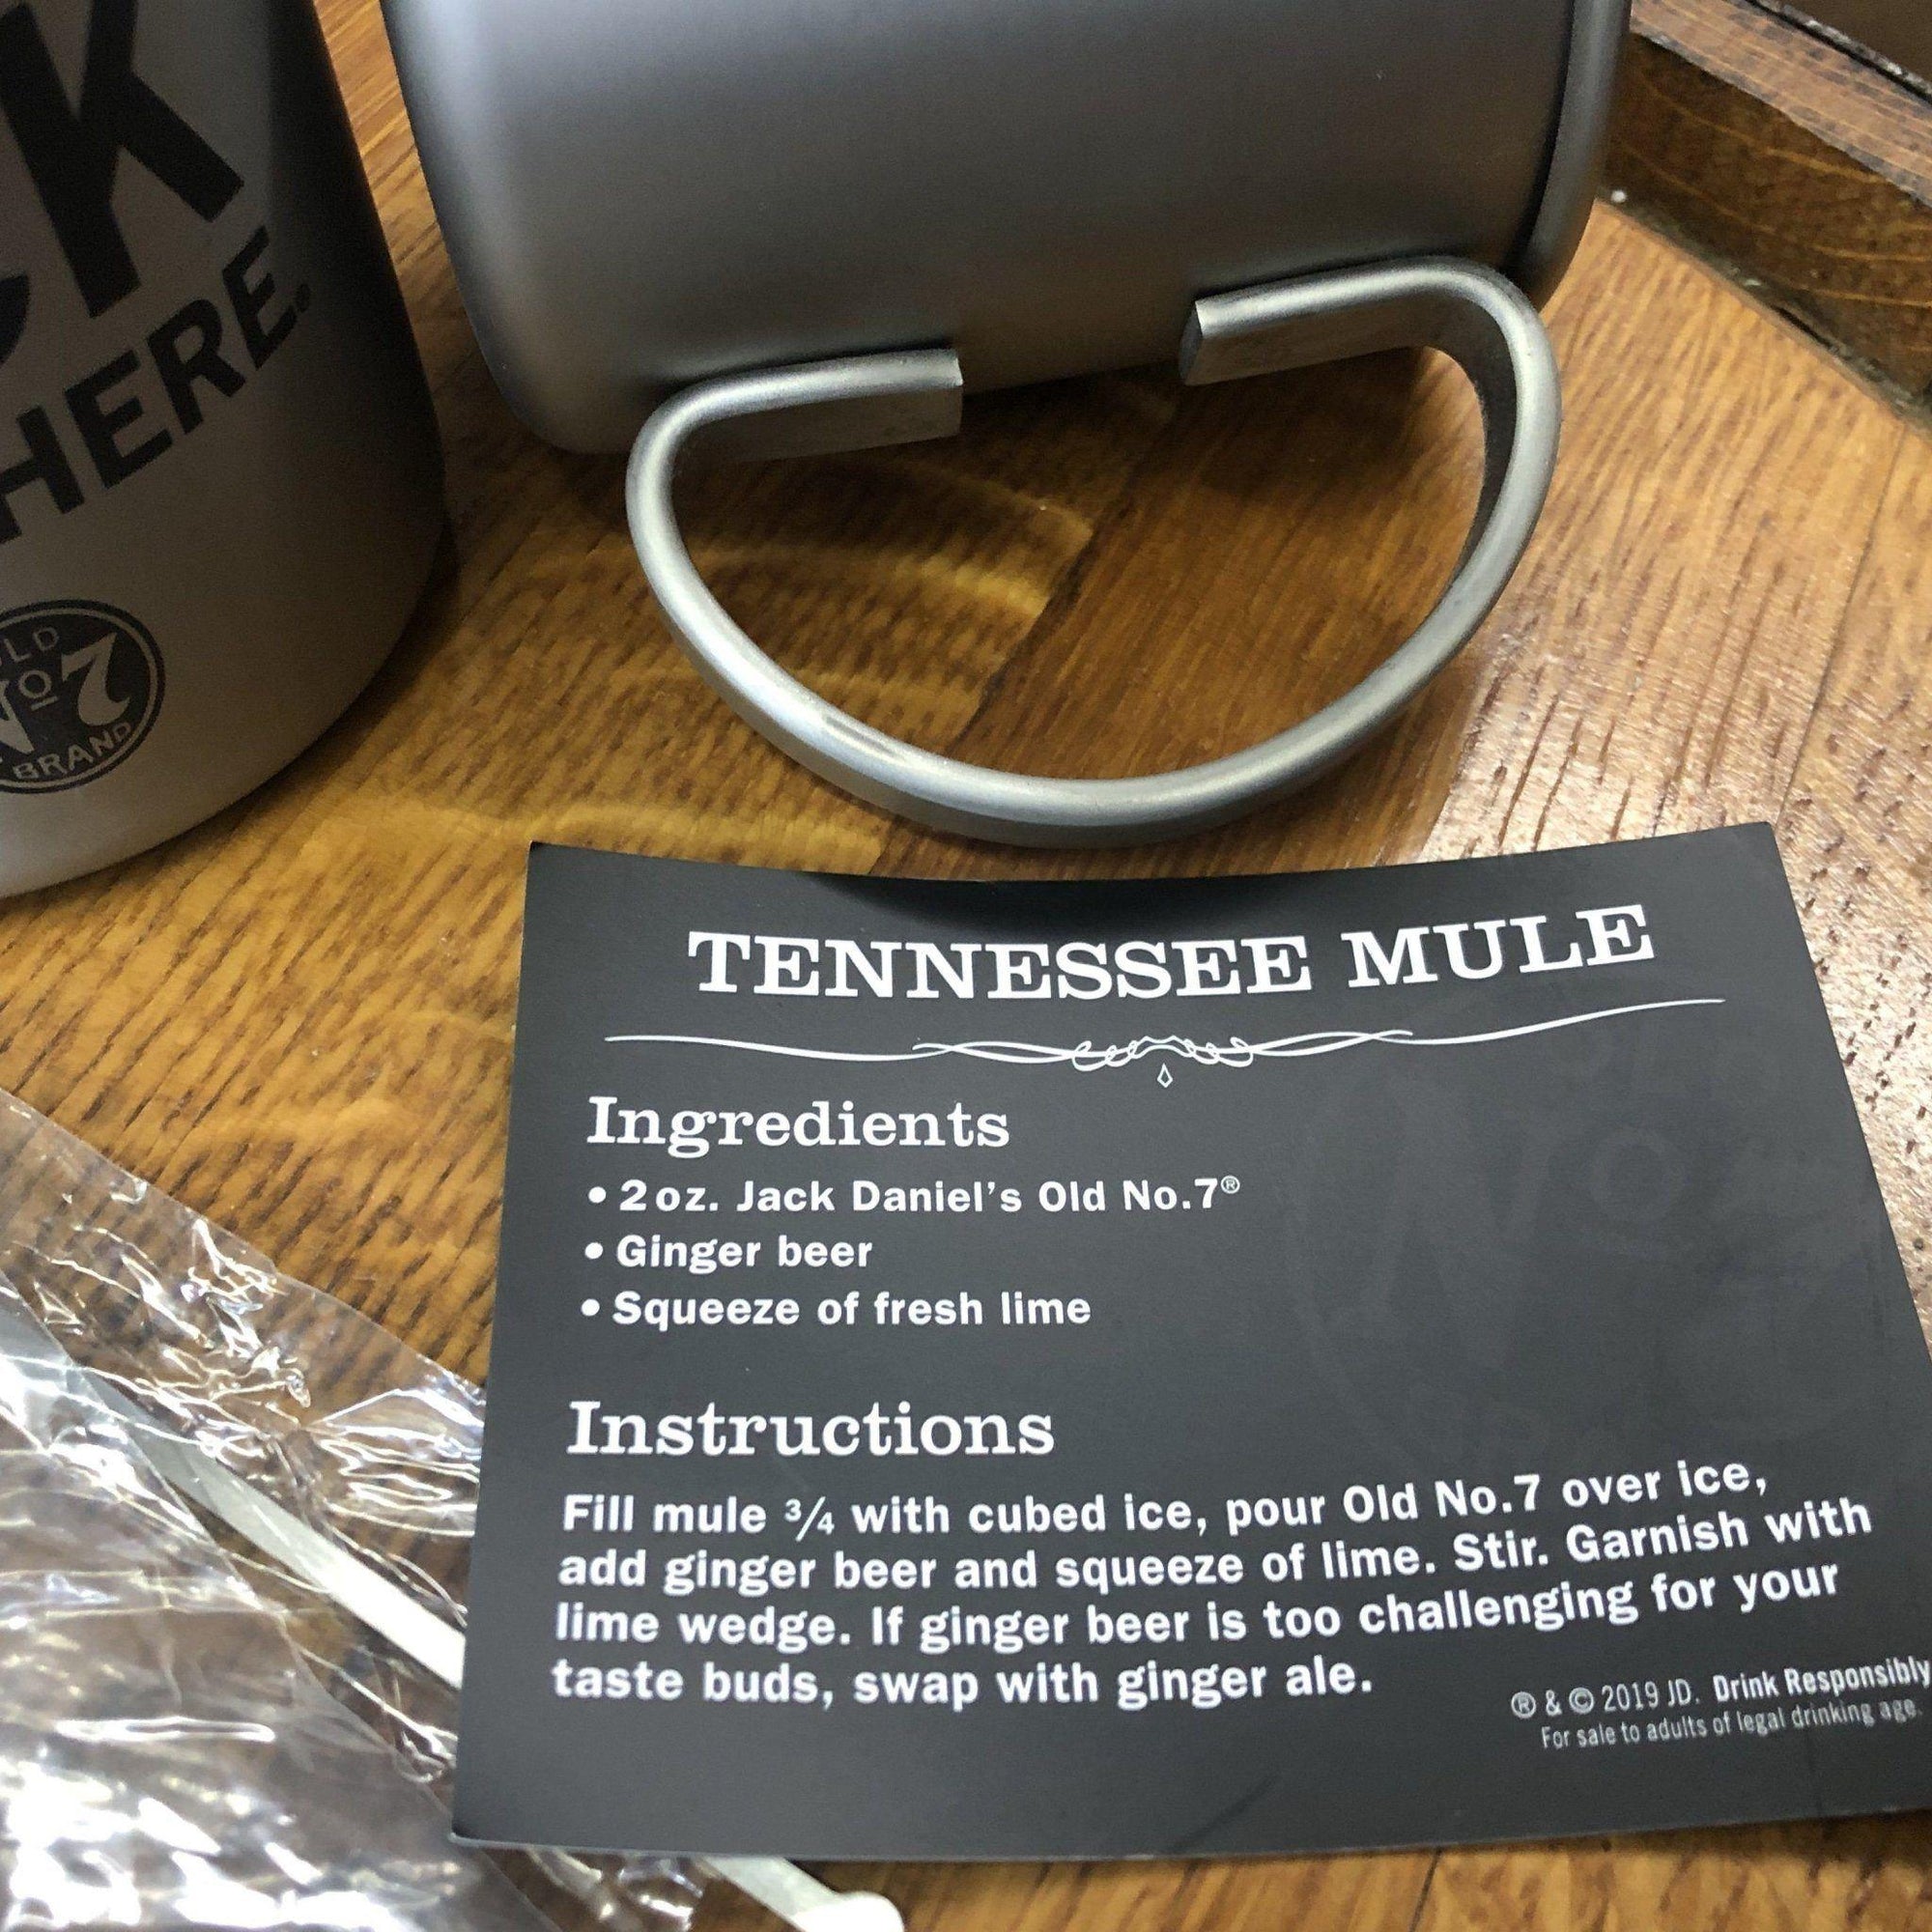 Jack Daniel’s Tennessee Mule Mug Set with Stirrers - The Whiskey Cave